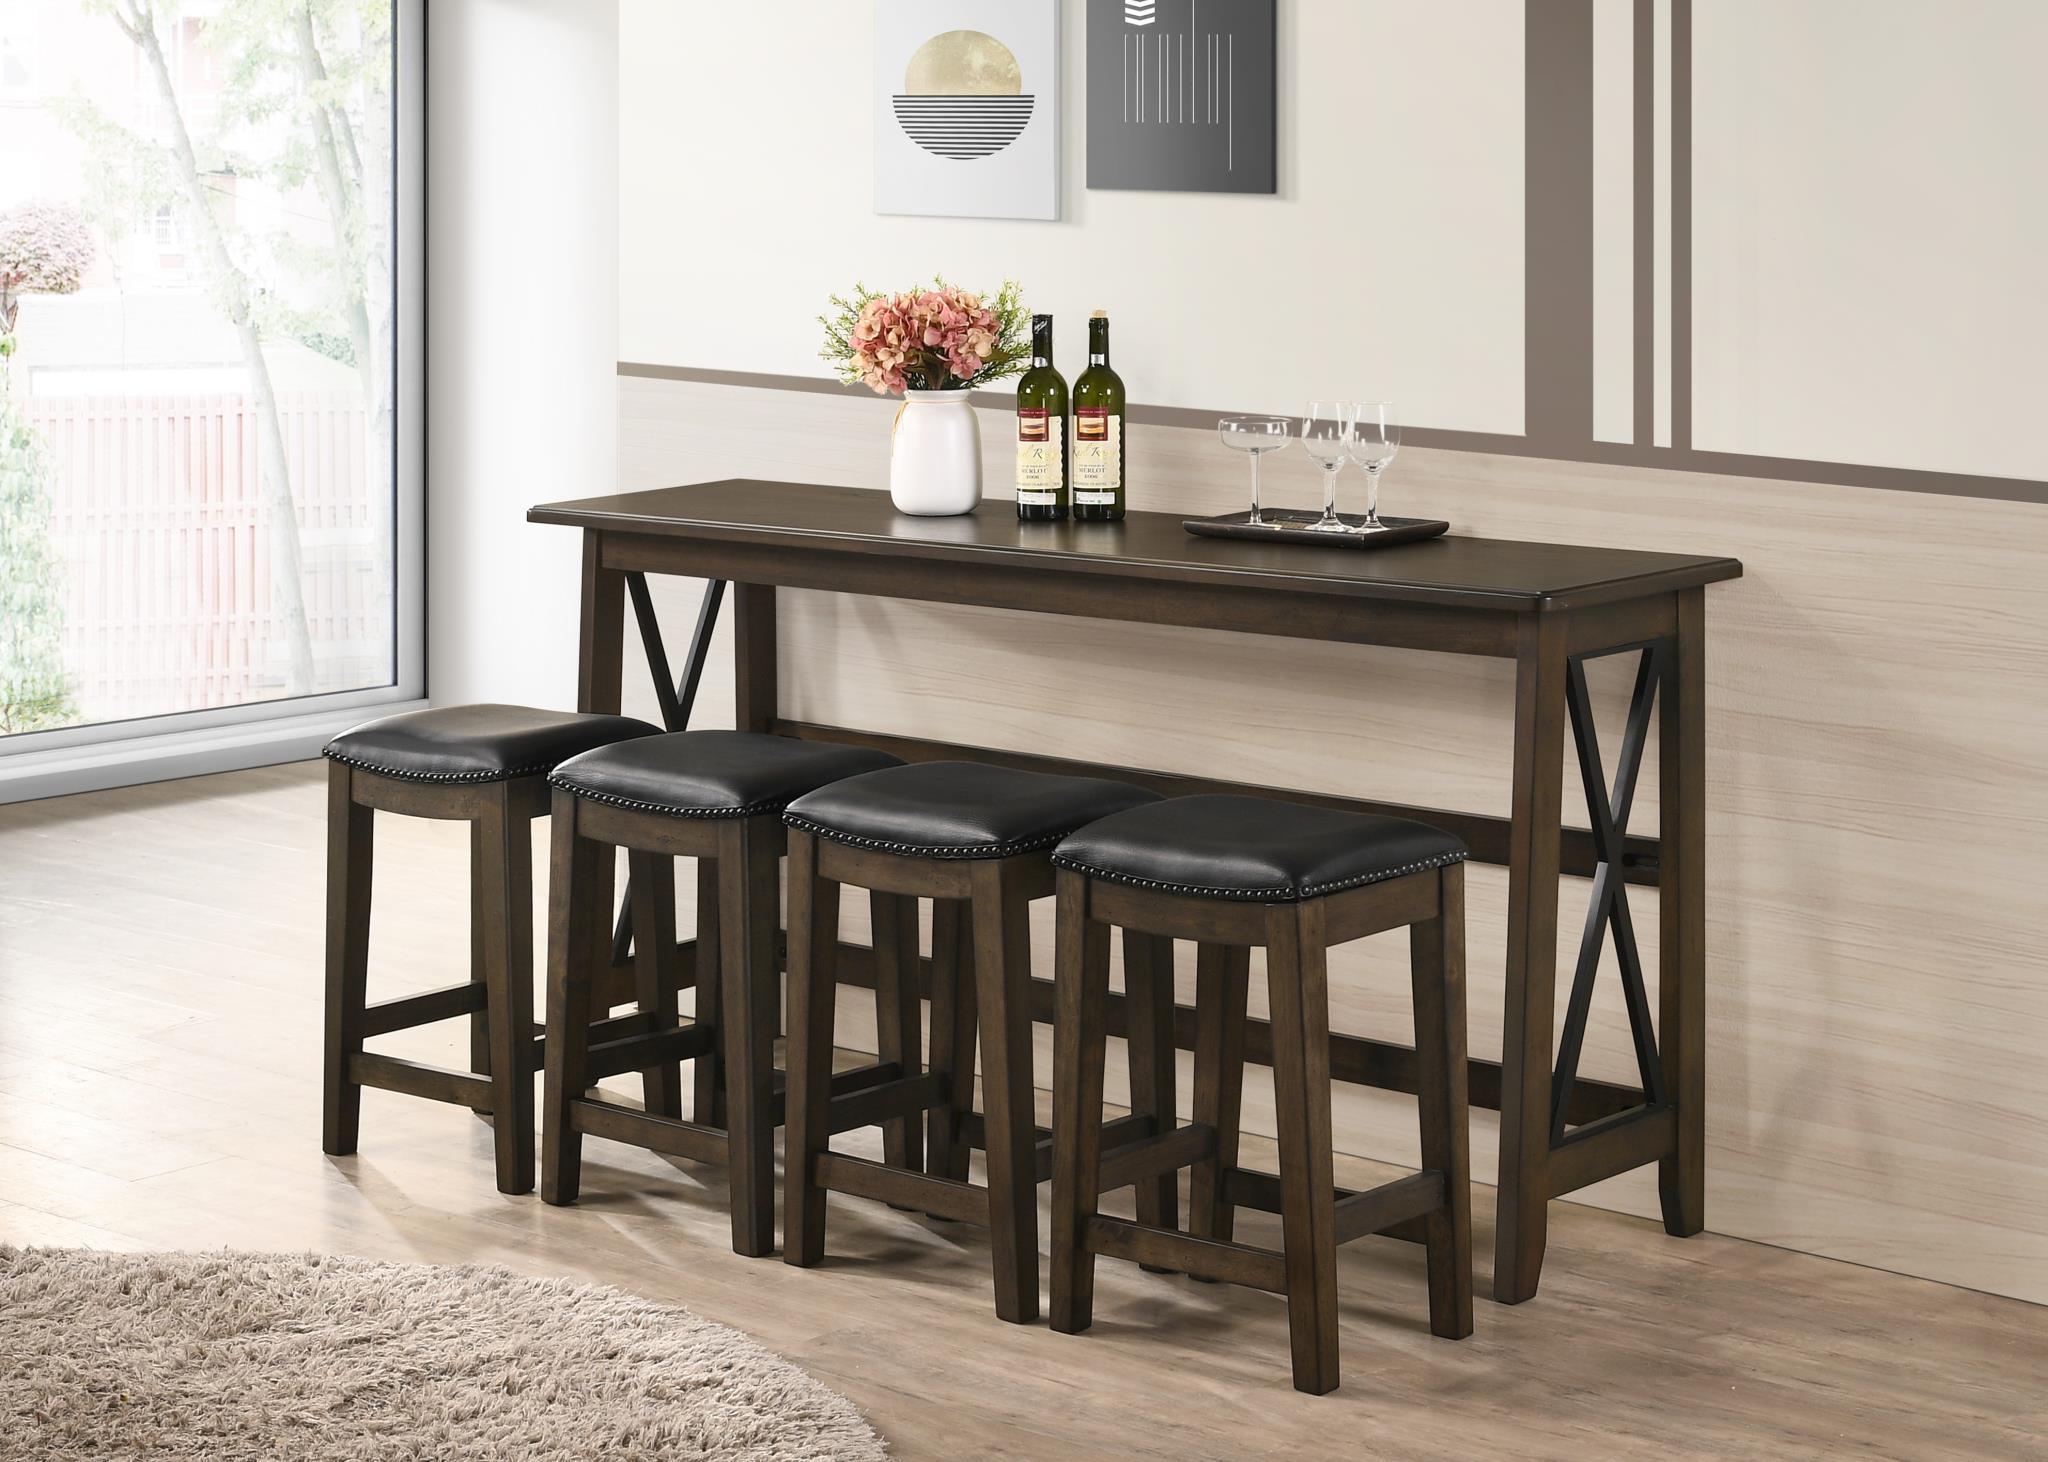 Transitional, Farmhouse Counter Table Set CARMINA 5938DS-533 5938DS-533 in Brown 